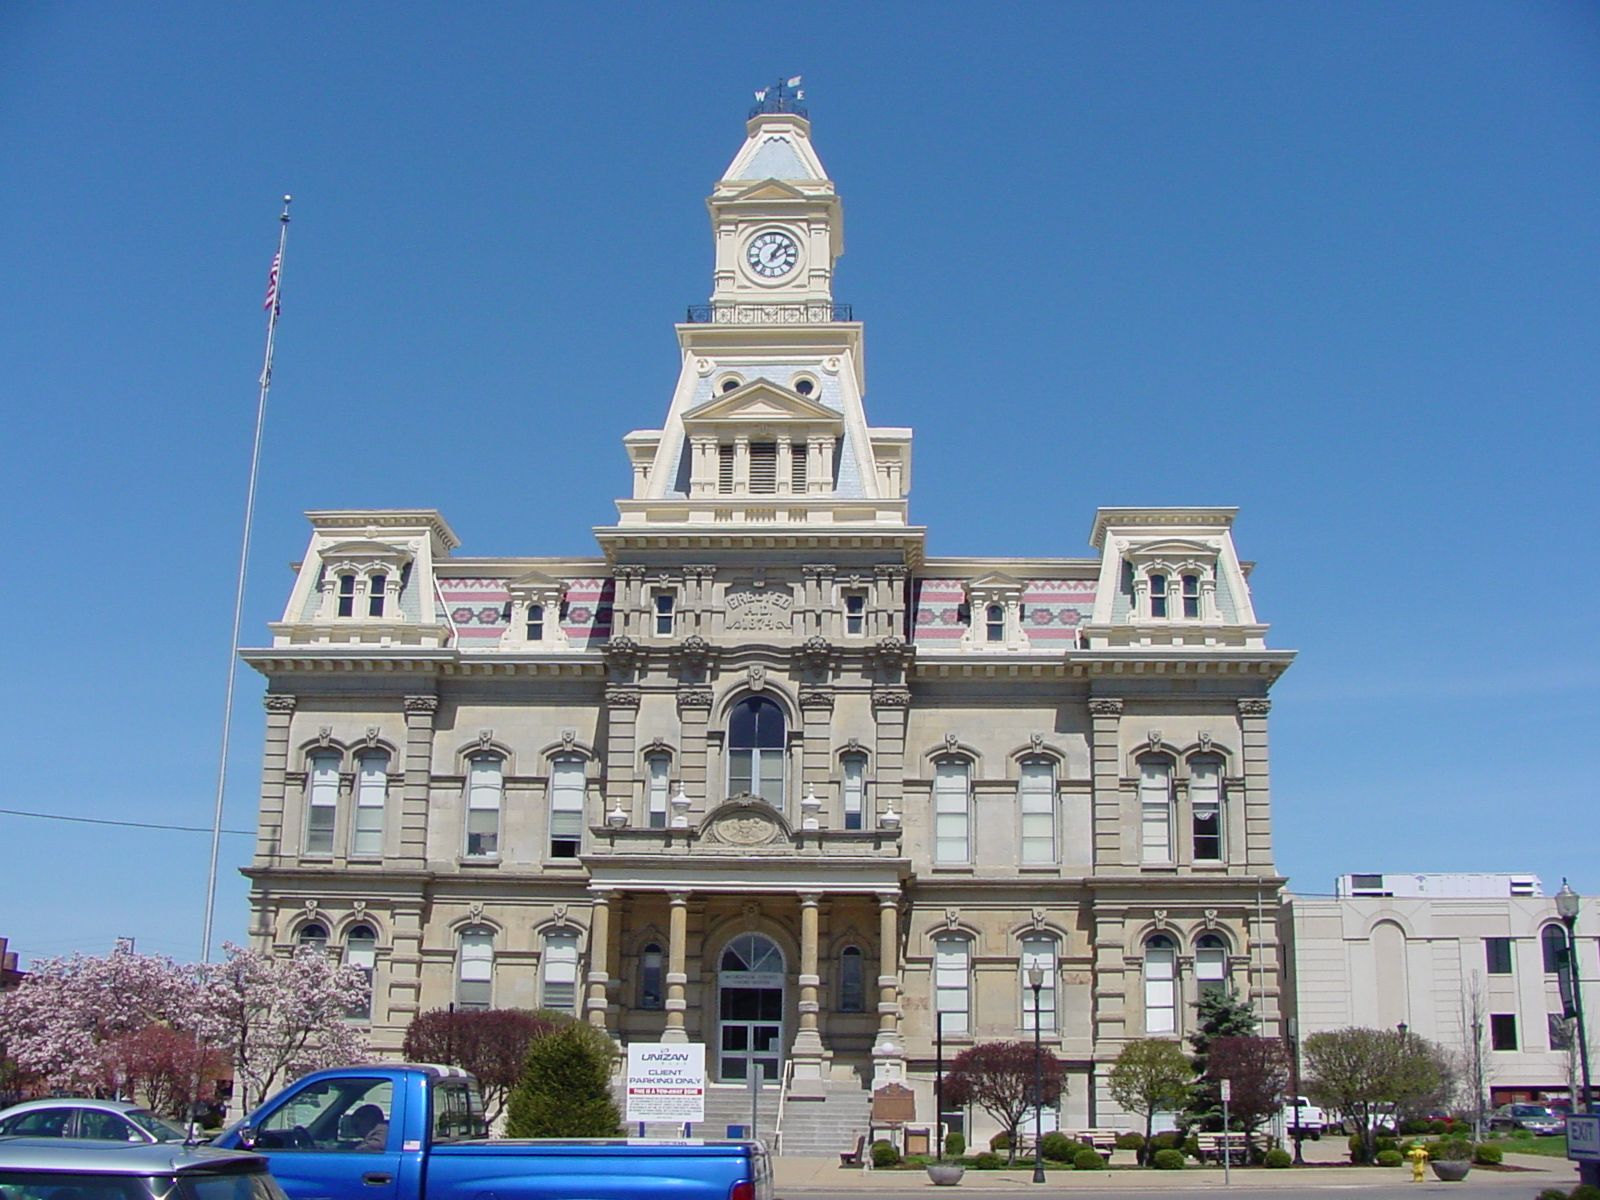 Present Muskingum County Courthouse, Built in 1874.